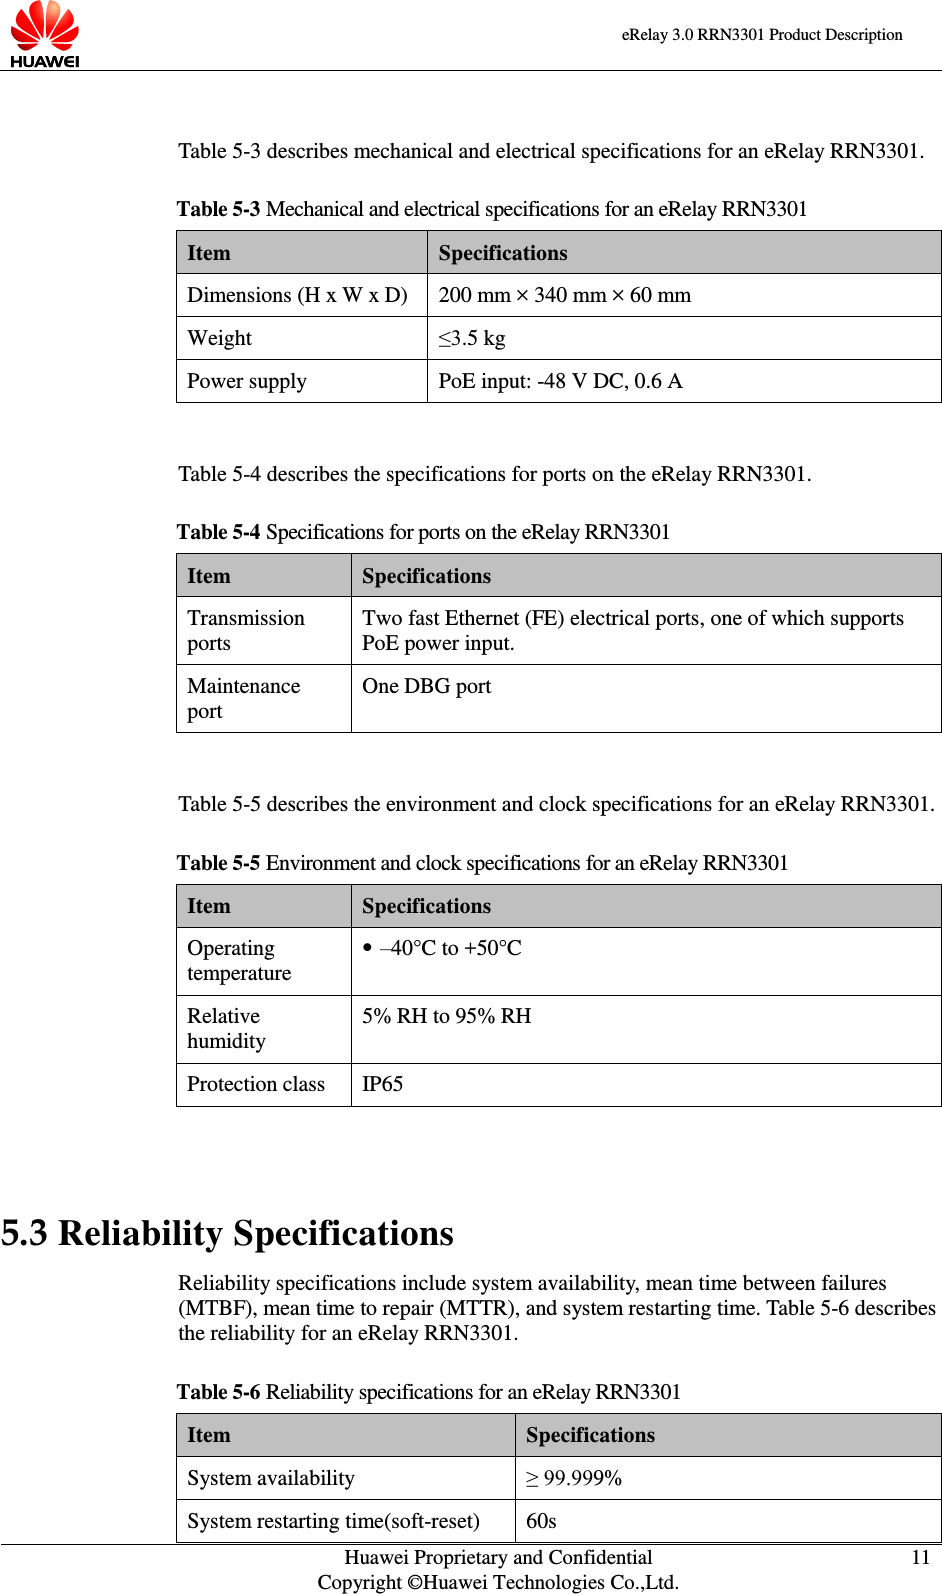    eRelay 3.0 RRN3301 Product Description    Huawei Proprietary and Confidential Copyright ©Huawei Technologies Co.,Ltd. 11   Table 5-3 describes mechanical and electrical specifications for an eRelay RRN3301.   Table 5-3 Mechanical and electrical specifications for an eRelay RRN3301 Item Specifications Dimensions (H x W x D) 200 mm × 340 mm × 60 mm Weight ≤3.5 kg Power supply PoE input: -48 V DC, 0.6 A  Table 5-4 describes the specifications for ports on the eRelay RRN3301.   Table 5-4 Specifications for ports on the eRelay RRN3301 Item Specifications Transmission ports Two fast Ethernet (FE) electrical ports, one of which supports PoE power input.   Maintenance port One DBG port  Table 5-5 describes the environment and clock specifications for an eRelay RRN3301.   Table 5-5 Environment and clock specifications for an eRelay RRN3301 Item Specifications Operating temperature  –40°C to +50°C Relative humidity 5% RH to 95% RH Protection class IP65  5.3 Reliability Specifications Reliability specifications include system availability, mean time between failures (MTBF), mean time to repair (MTTR), and system restarting time. Table 5-6 describes the reliability for an eRelay RRN3301.   Table 5-6 Reliability specifications for an eRelay RRN3301 Item Specifications System availability ≥ 99.999% System restarting time(soft-reset) 60s 